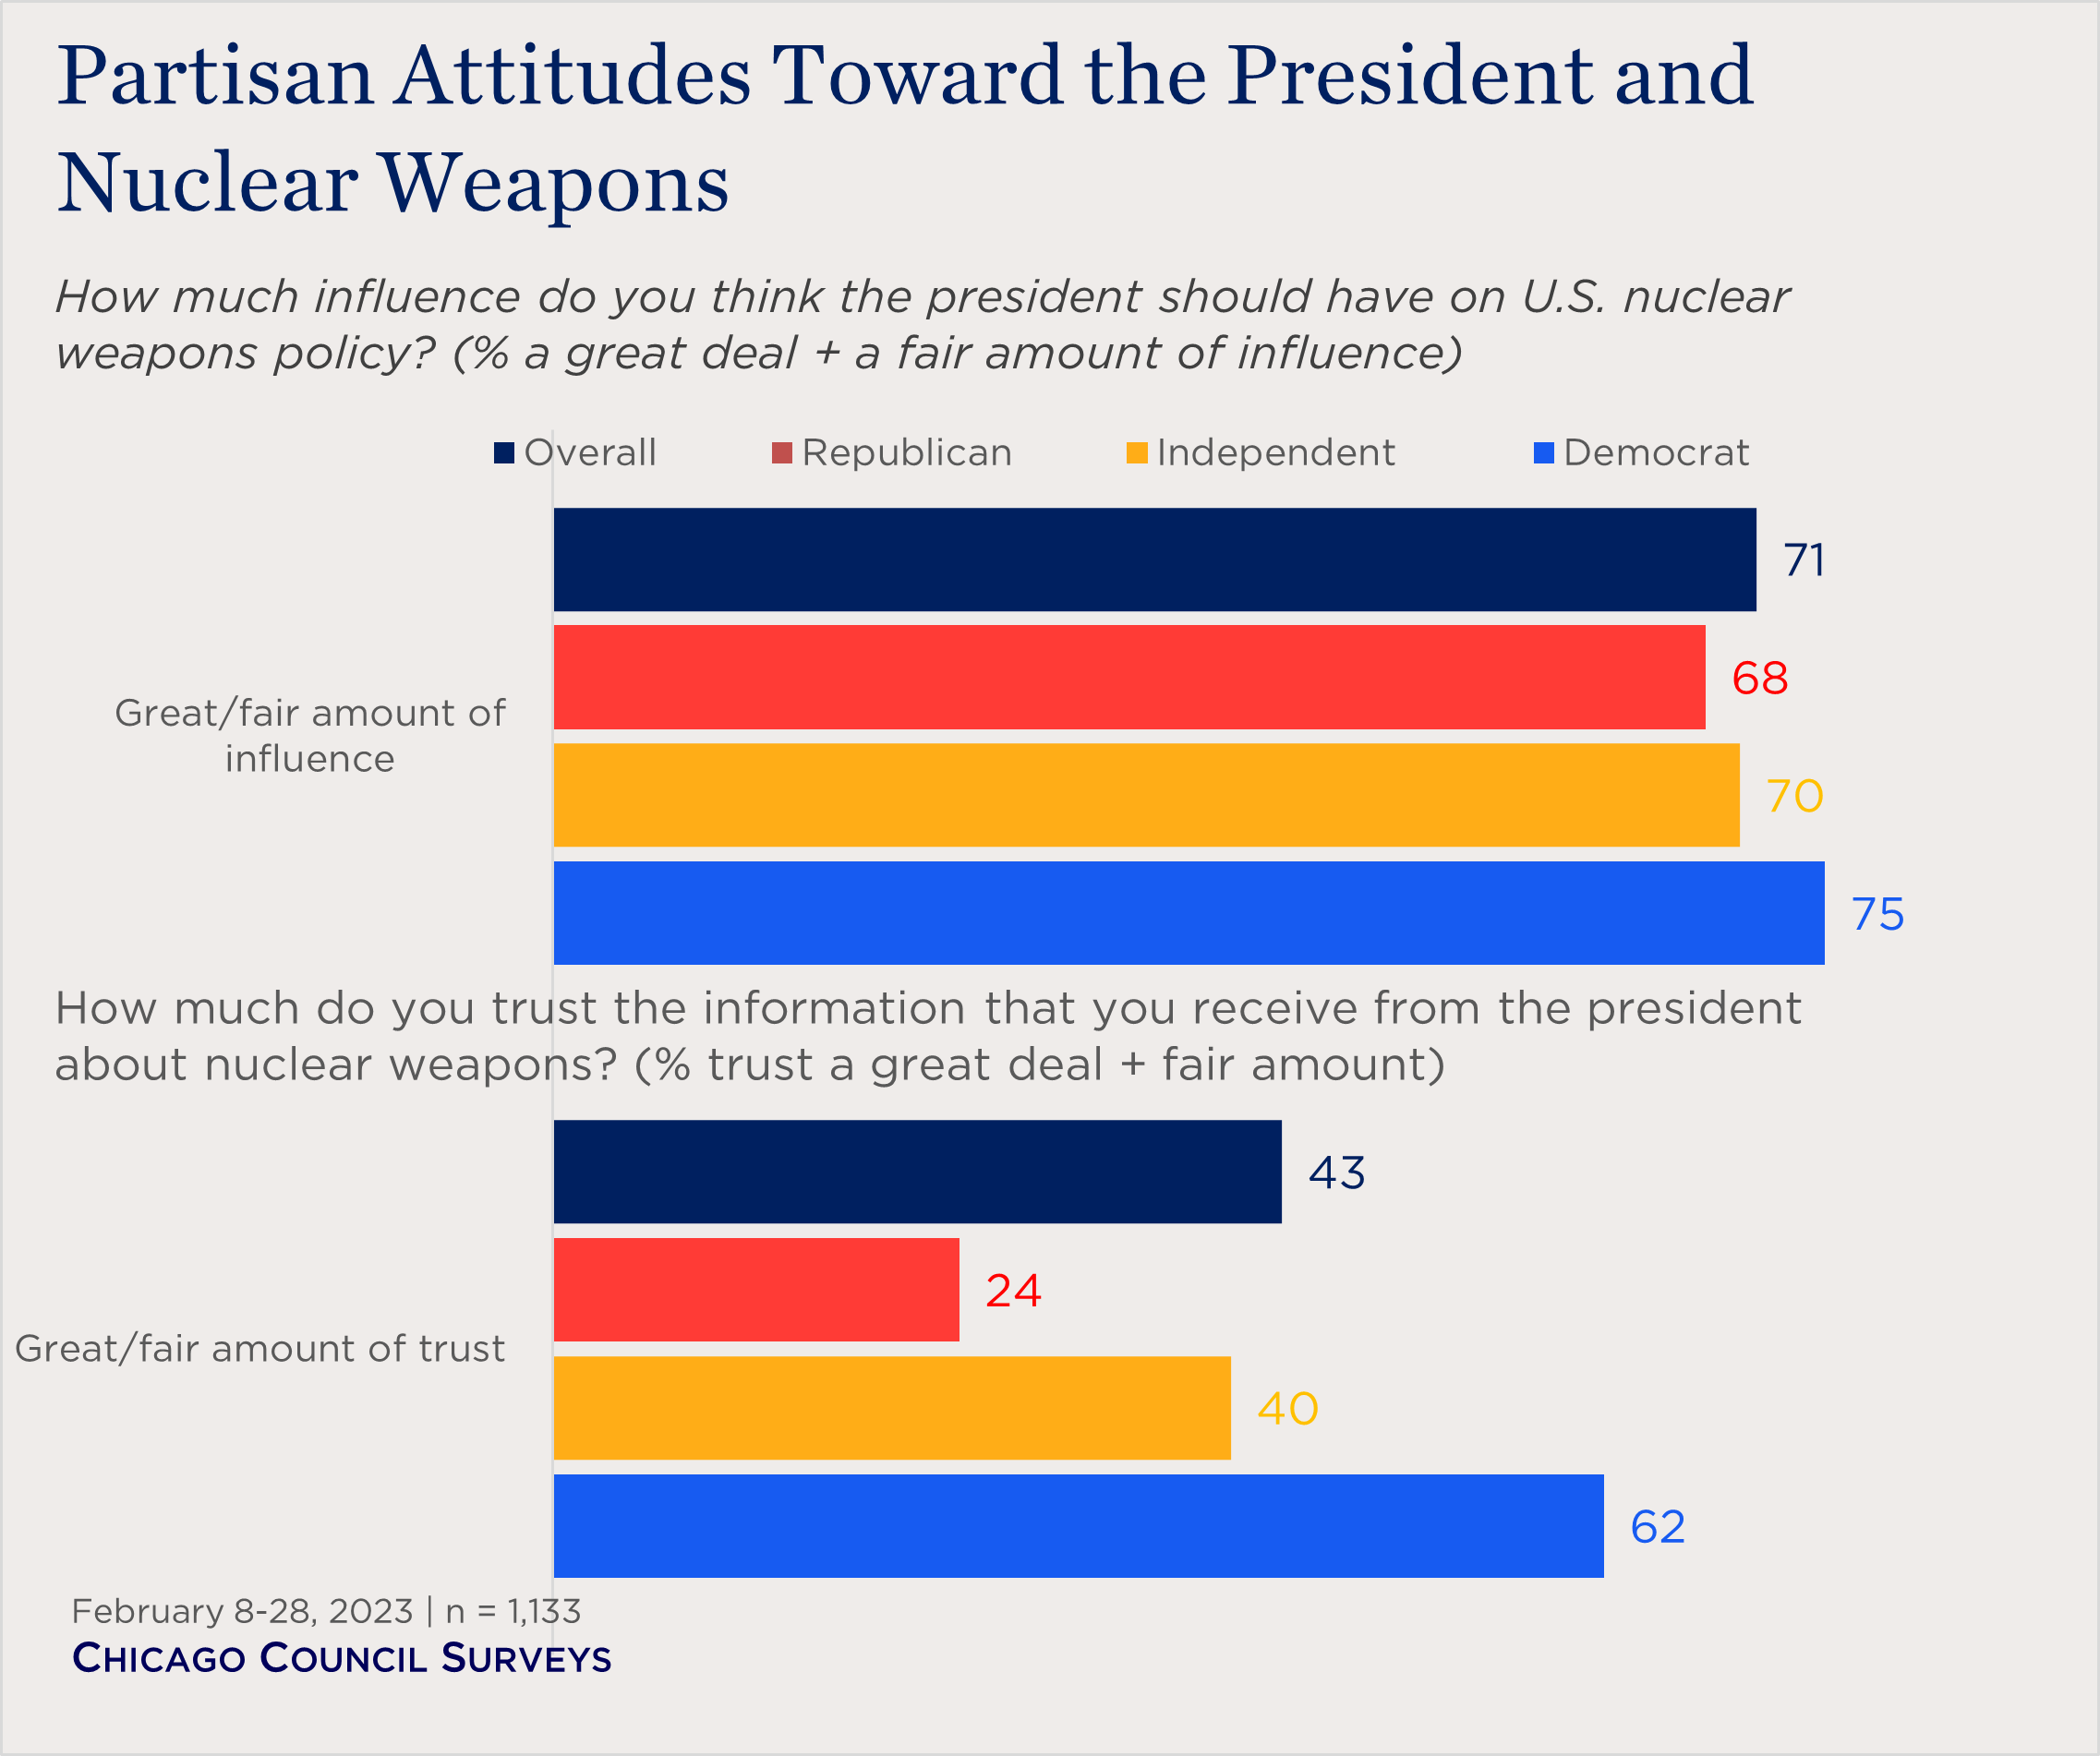 "bar charts showing partisan attitudes toward the president and nuclear weapons"